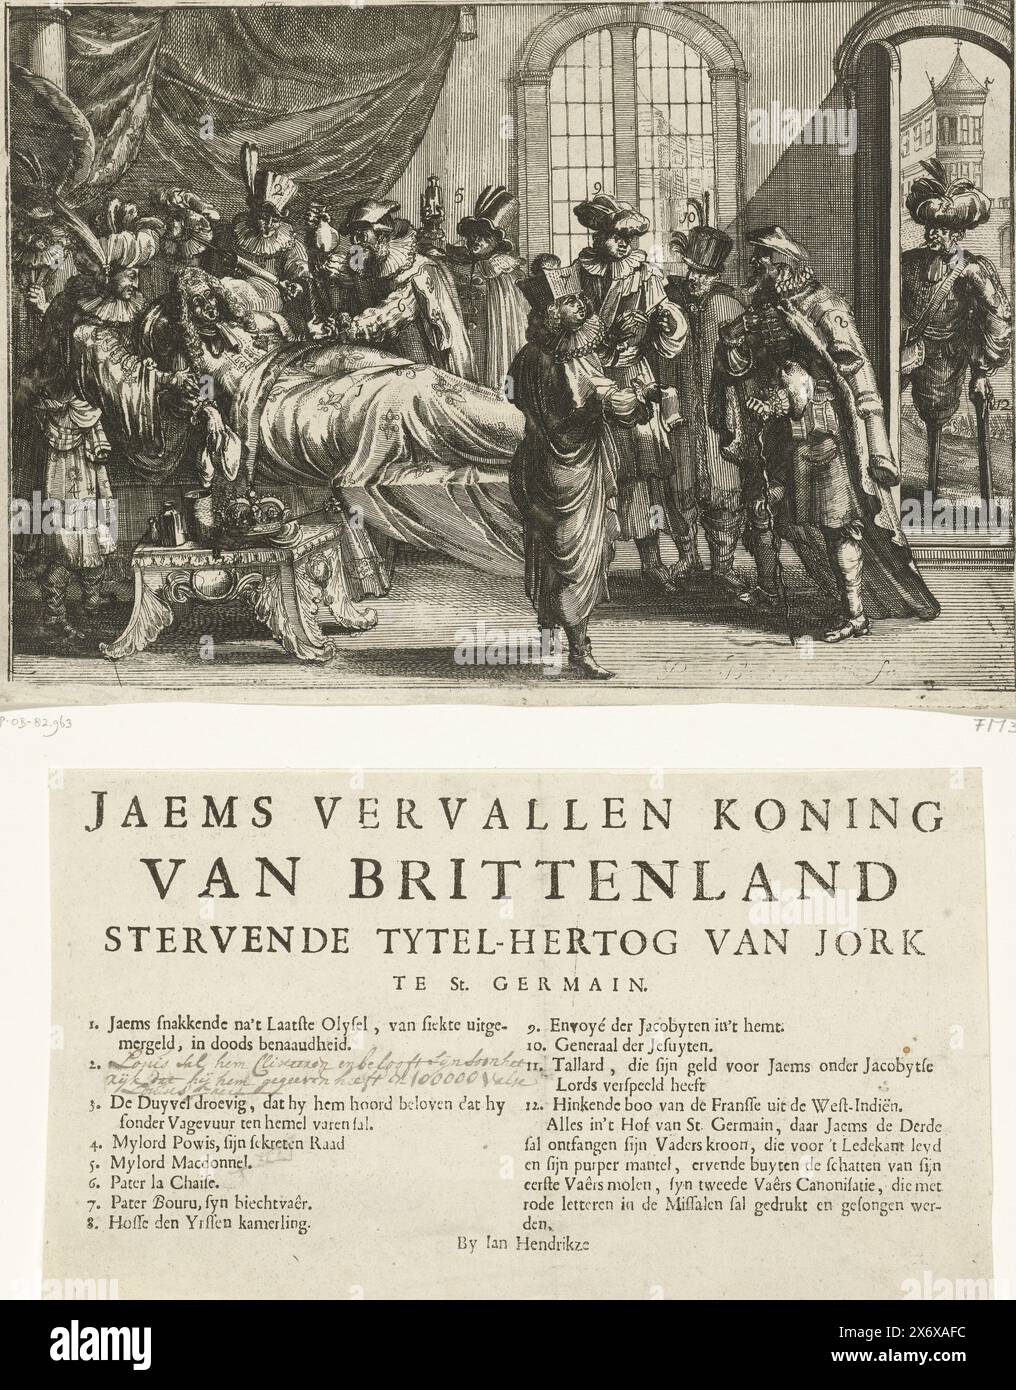 Cartoon on the death of James II, 1701, Jaem's fallen king of Brittenland dying Tytel-Duke of Jork in St. Germain (title on object), King James II on his deathbed, December 16, 1701. Doctors and courtiers stand around the bed of the king, on the left a Turkish physician and Louis XIV with an enema syringe to purge the king. To the right of the bed, a group of courtiers, including confessor Father Bouru, discusses the situation. On the right in the doorway a French messenger from the West Indies, with turban, wooden leg and crutch. Print and a text sheet with the title and legend 1-12., print, Stock Photo